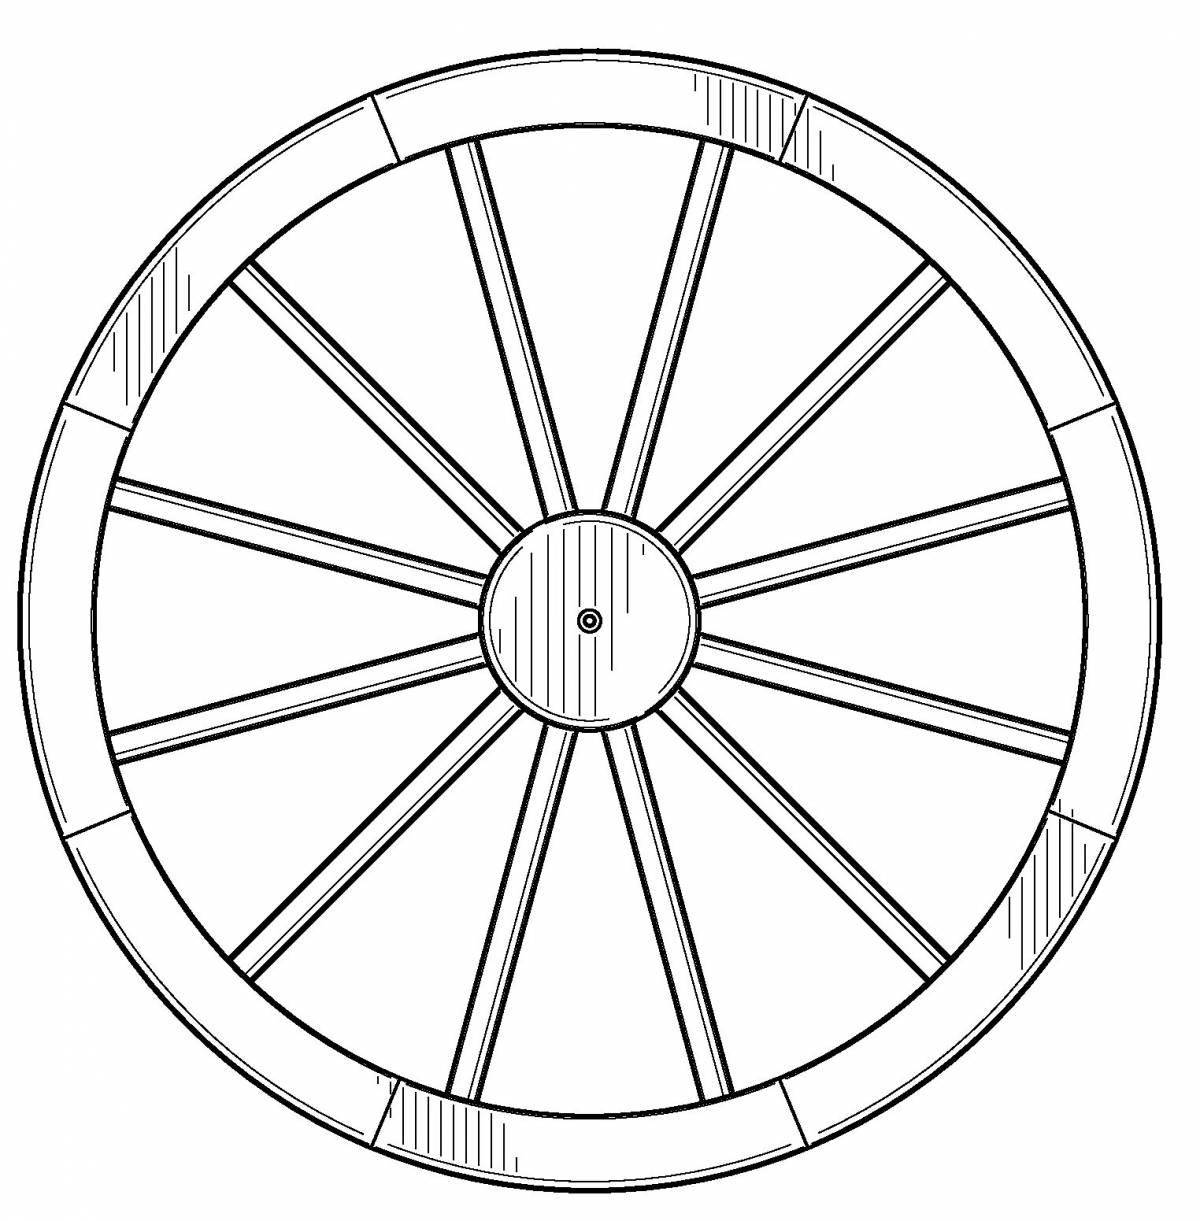 Colorful wheel coloring page for kids